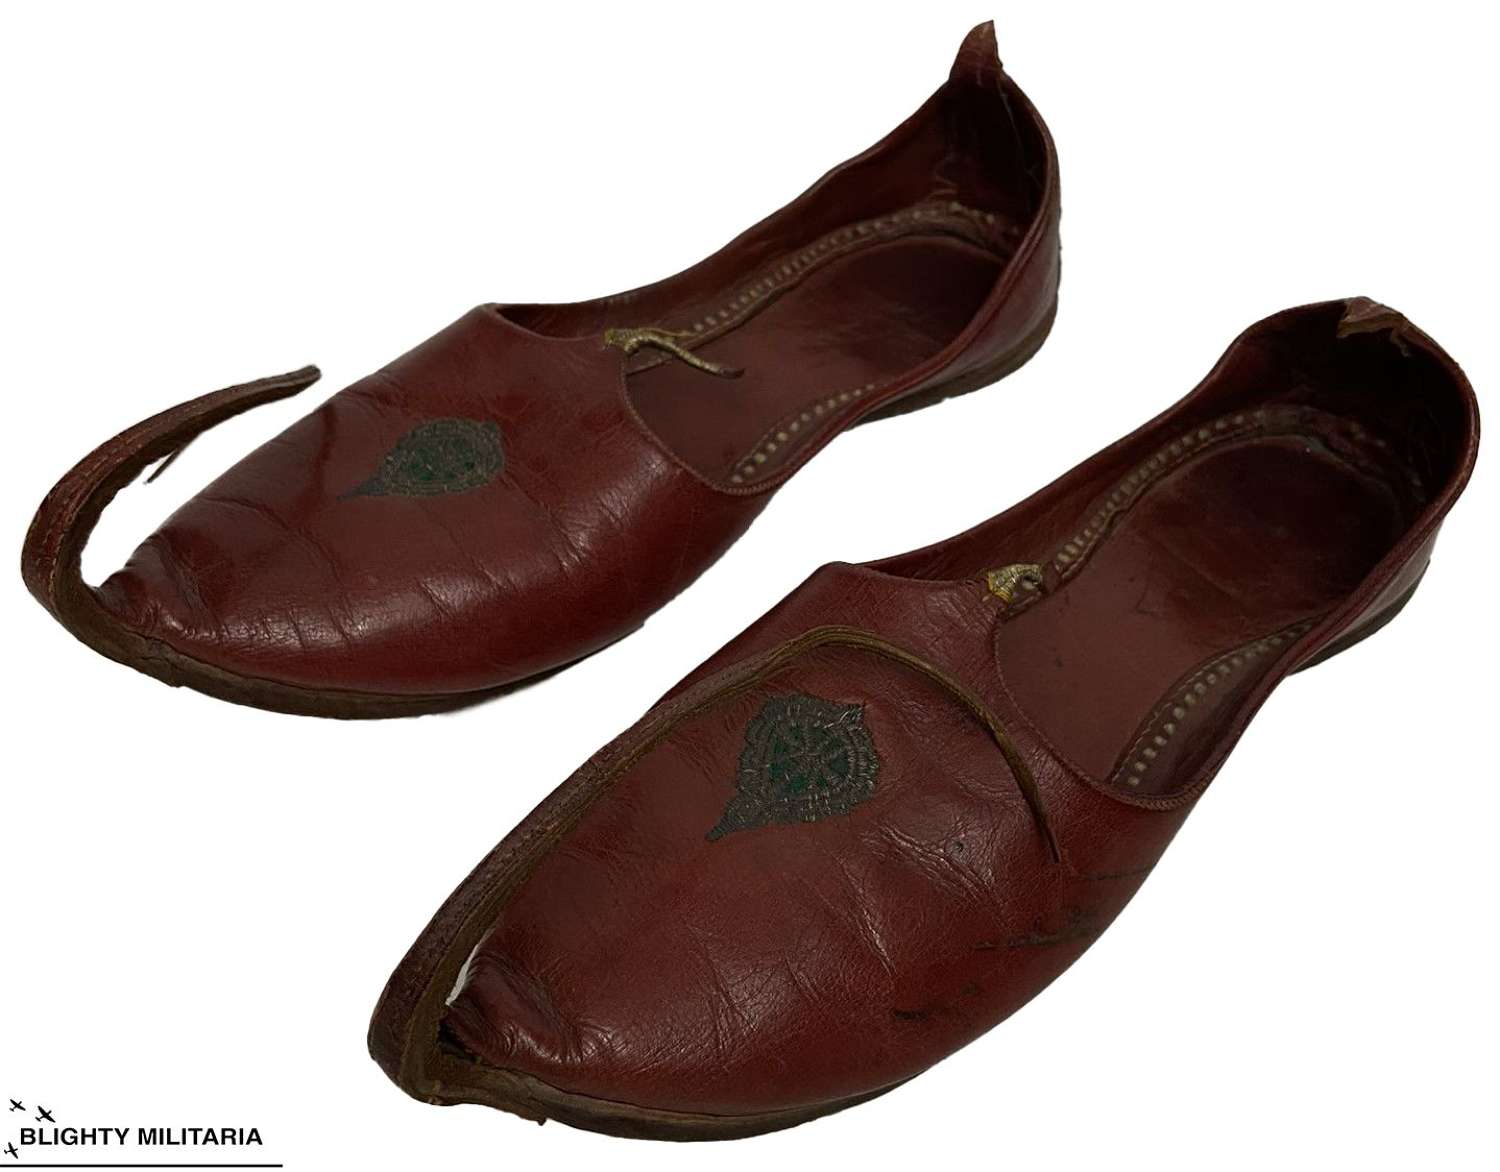 Original 1940s Leather Turkish Slippers - British Army Officer's